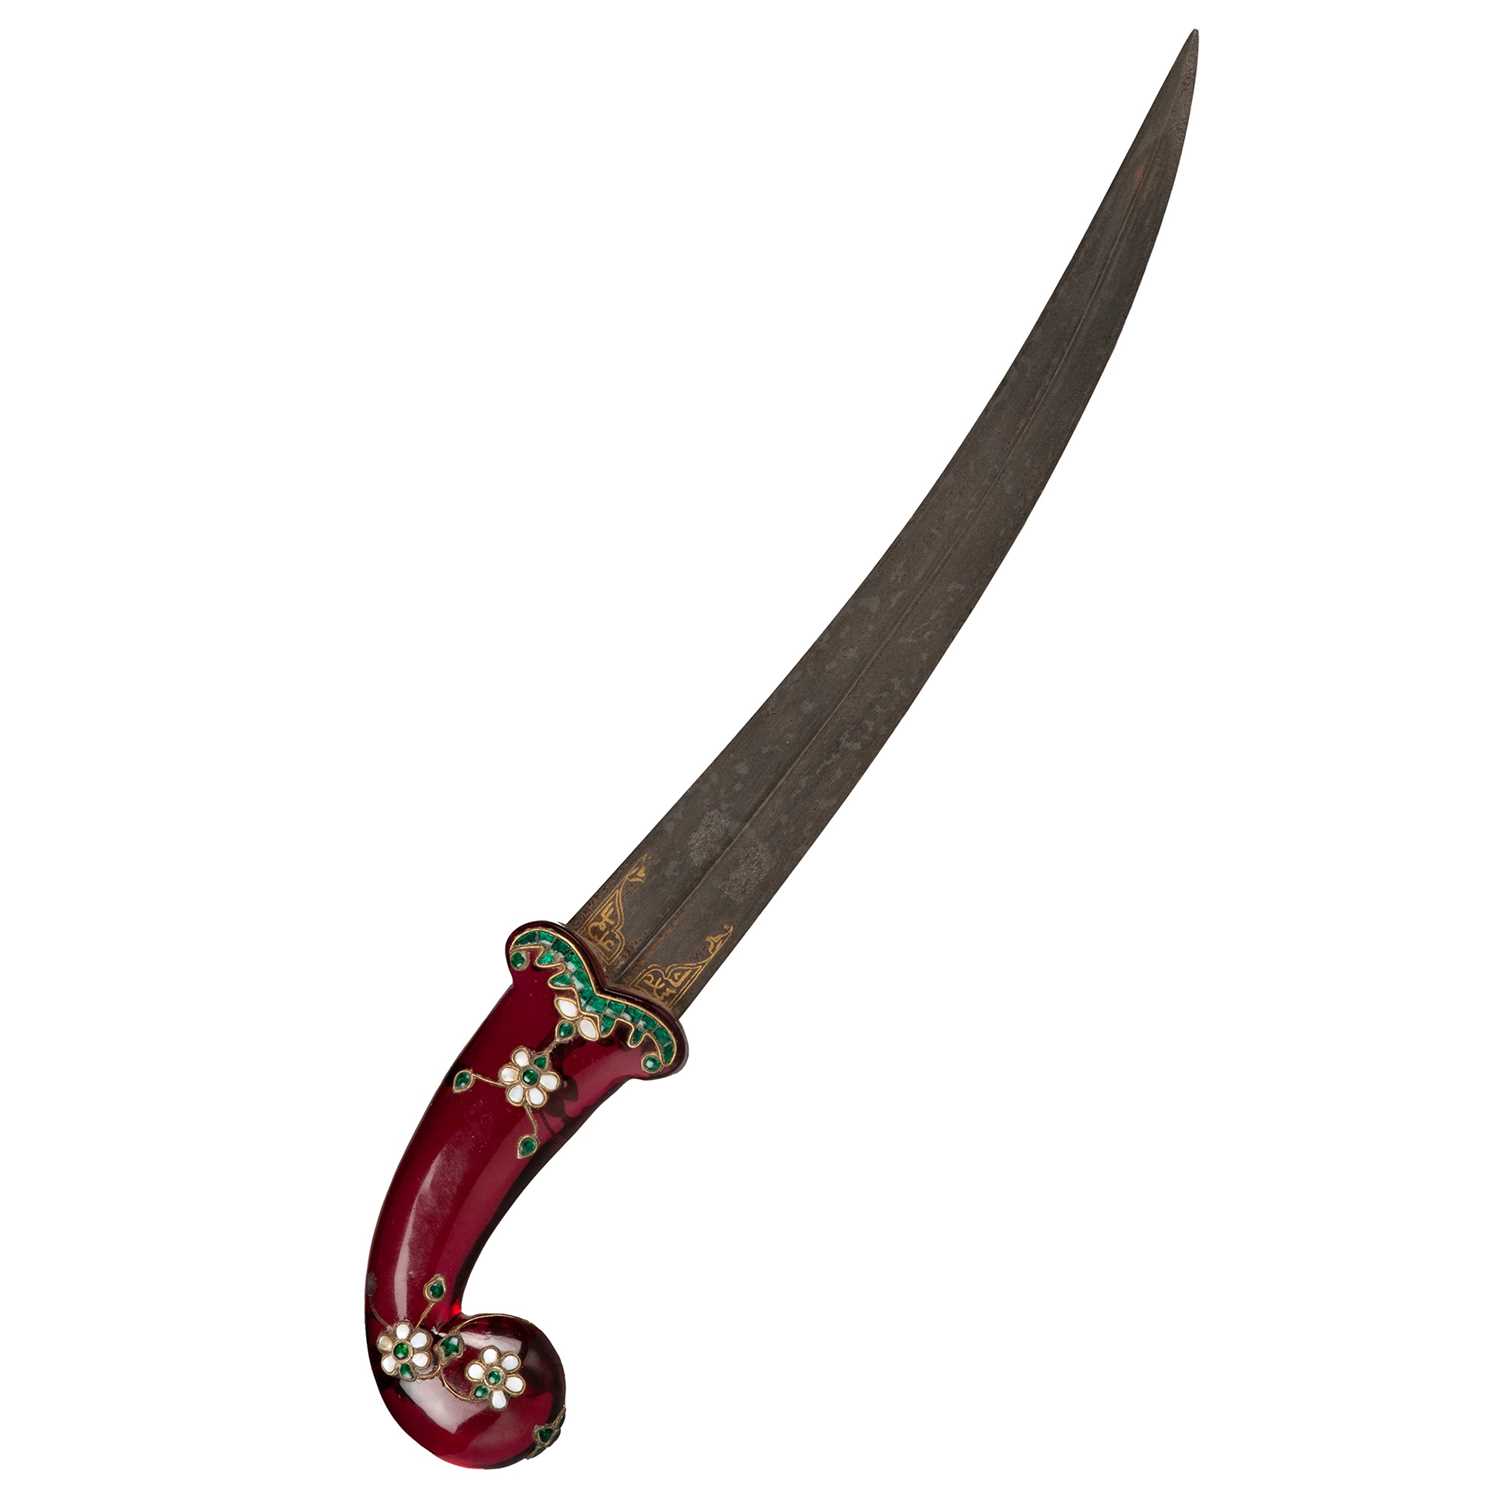 AN INLAID RED CRYSTAL-HILTED DAGGER, MUGHAL, INDIA, 18TH-19TH CENTURY